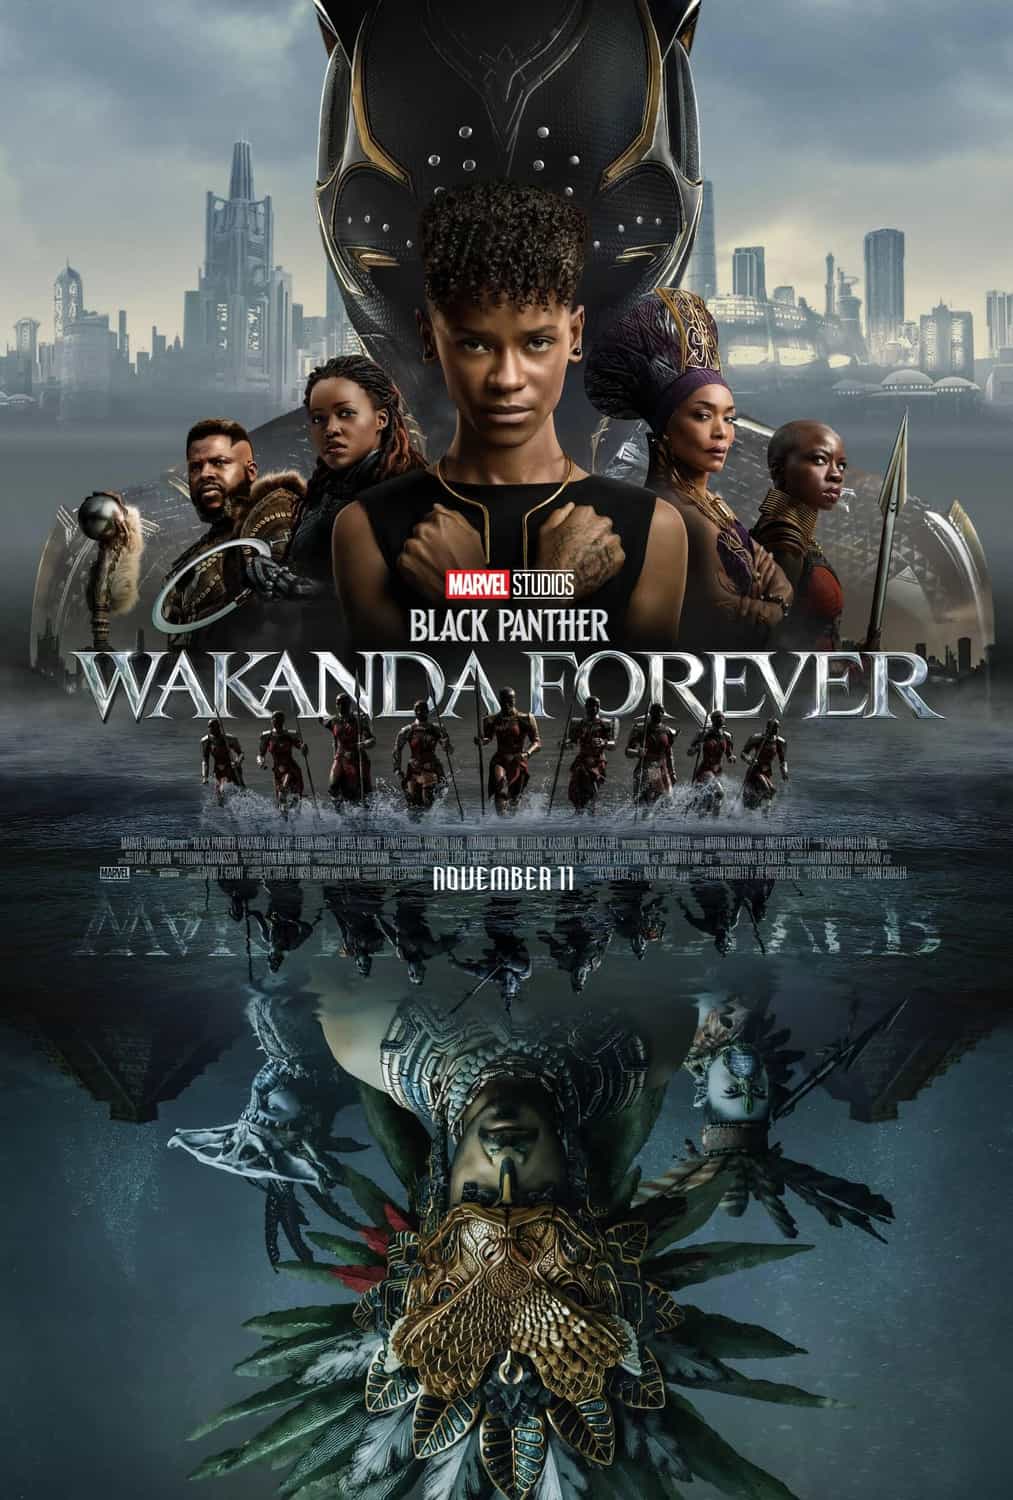 US Box Office Weekend Report 11th - 13th November 2022:  Black Panther: Wakanda Forever opens at the top of the US box office with $181 Million debut